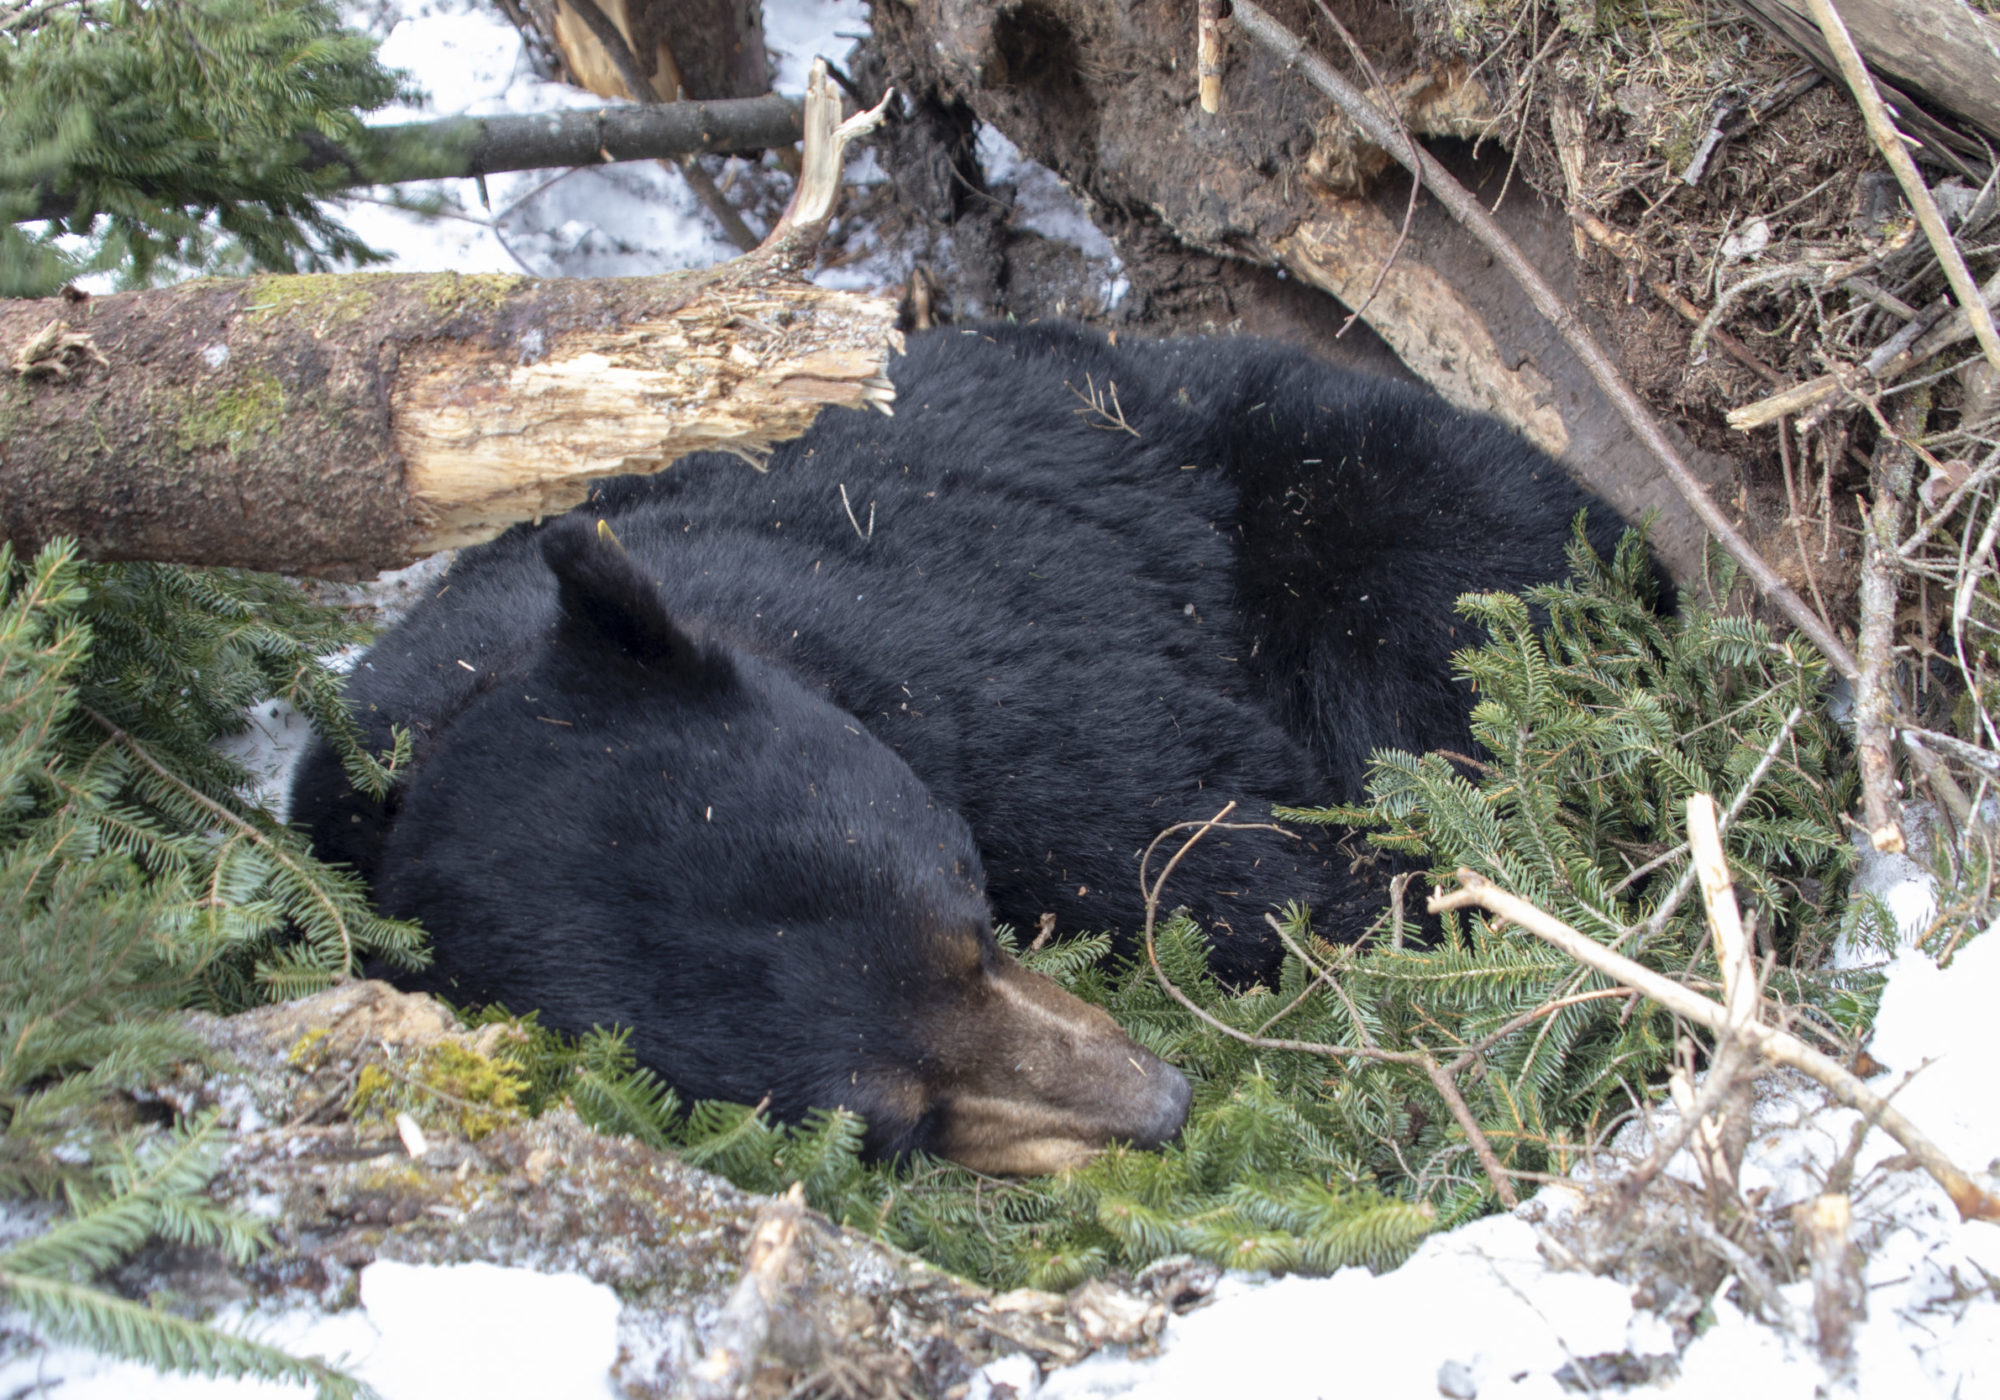 Stark, a radio collared male bear, rests on his bed of balsam fir in his den after being checked by biologists. Soon after this image was taken, they covered his den back over with the logs, sticks, and snow to let him rest for the remainder of winter.  K.P. McFarland